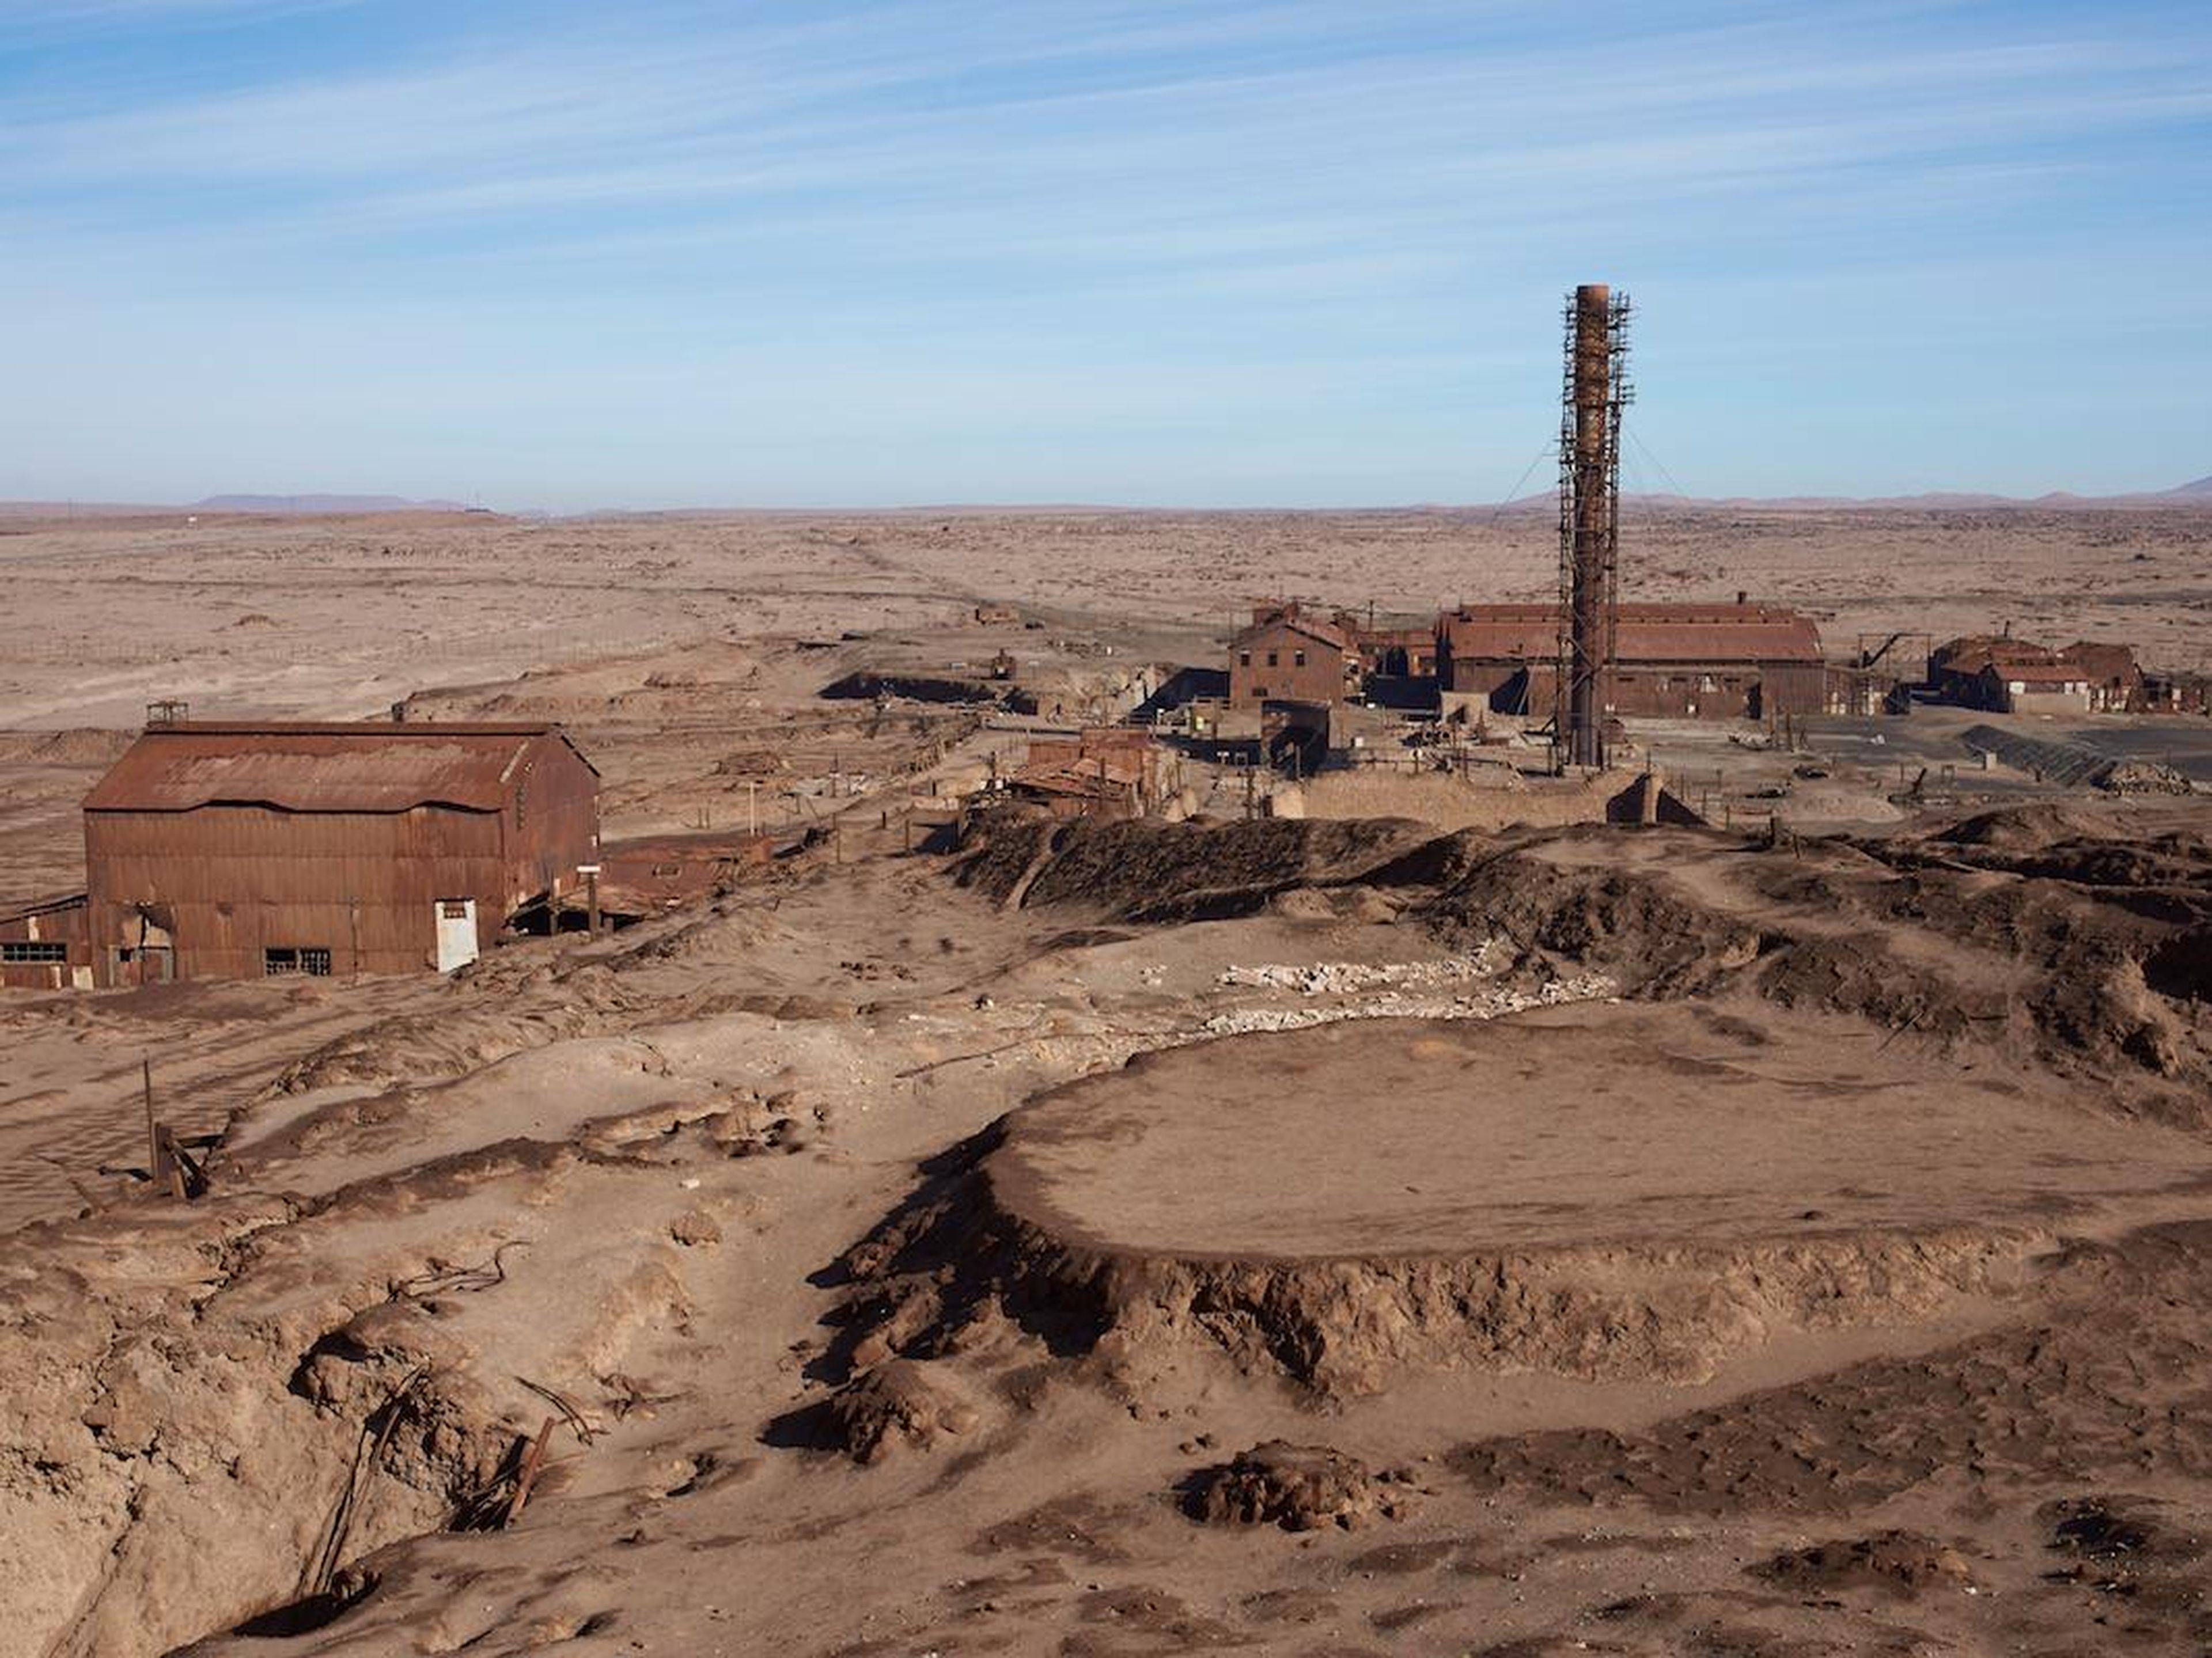 Humberstone was left so suddenly that it appears frozen in time.